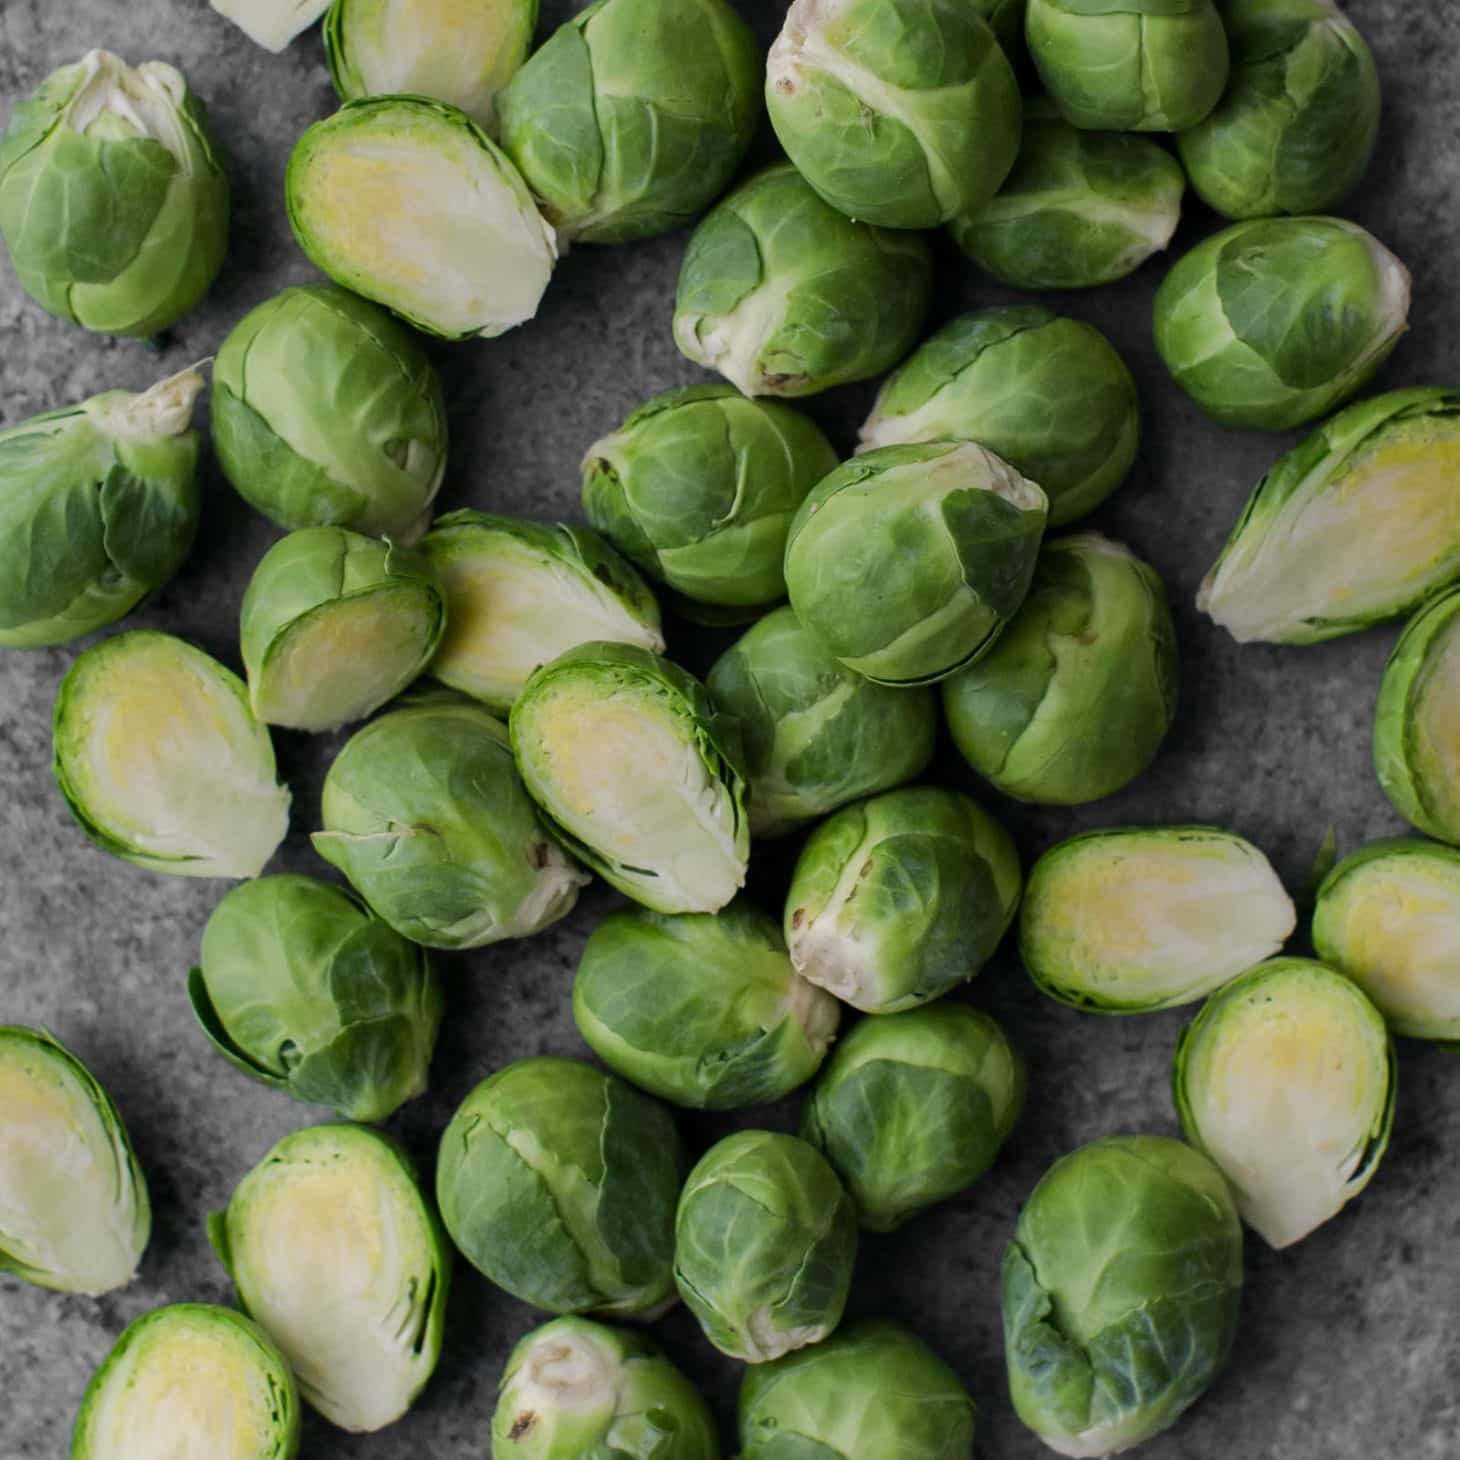 Brussels Sprouts- Explore an Ingredient